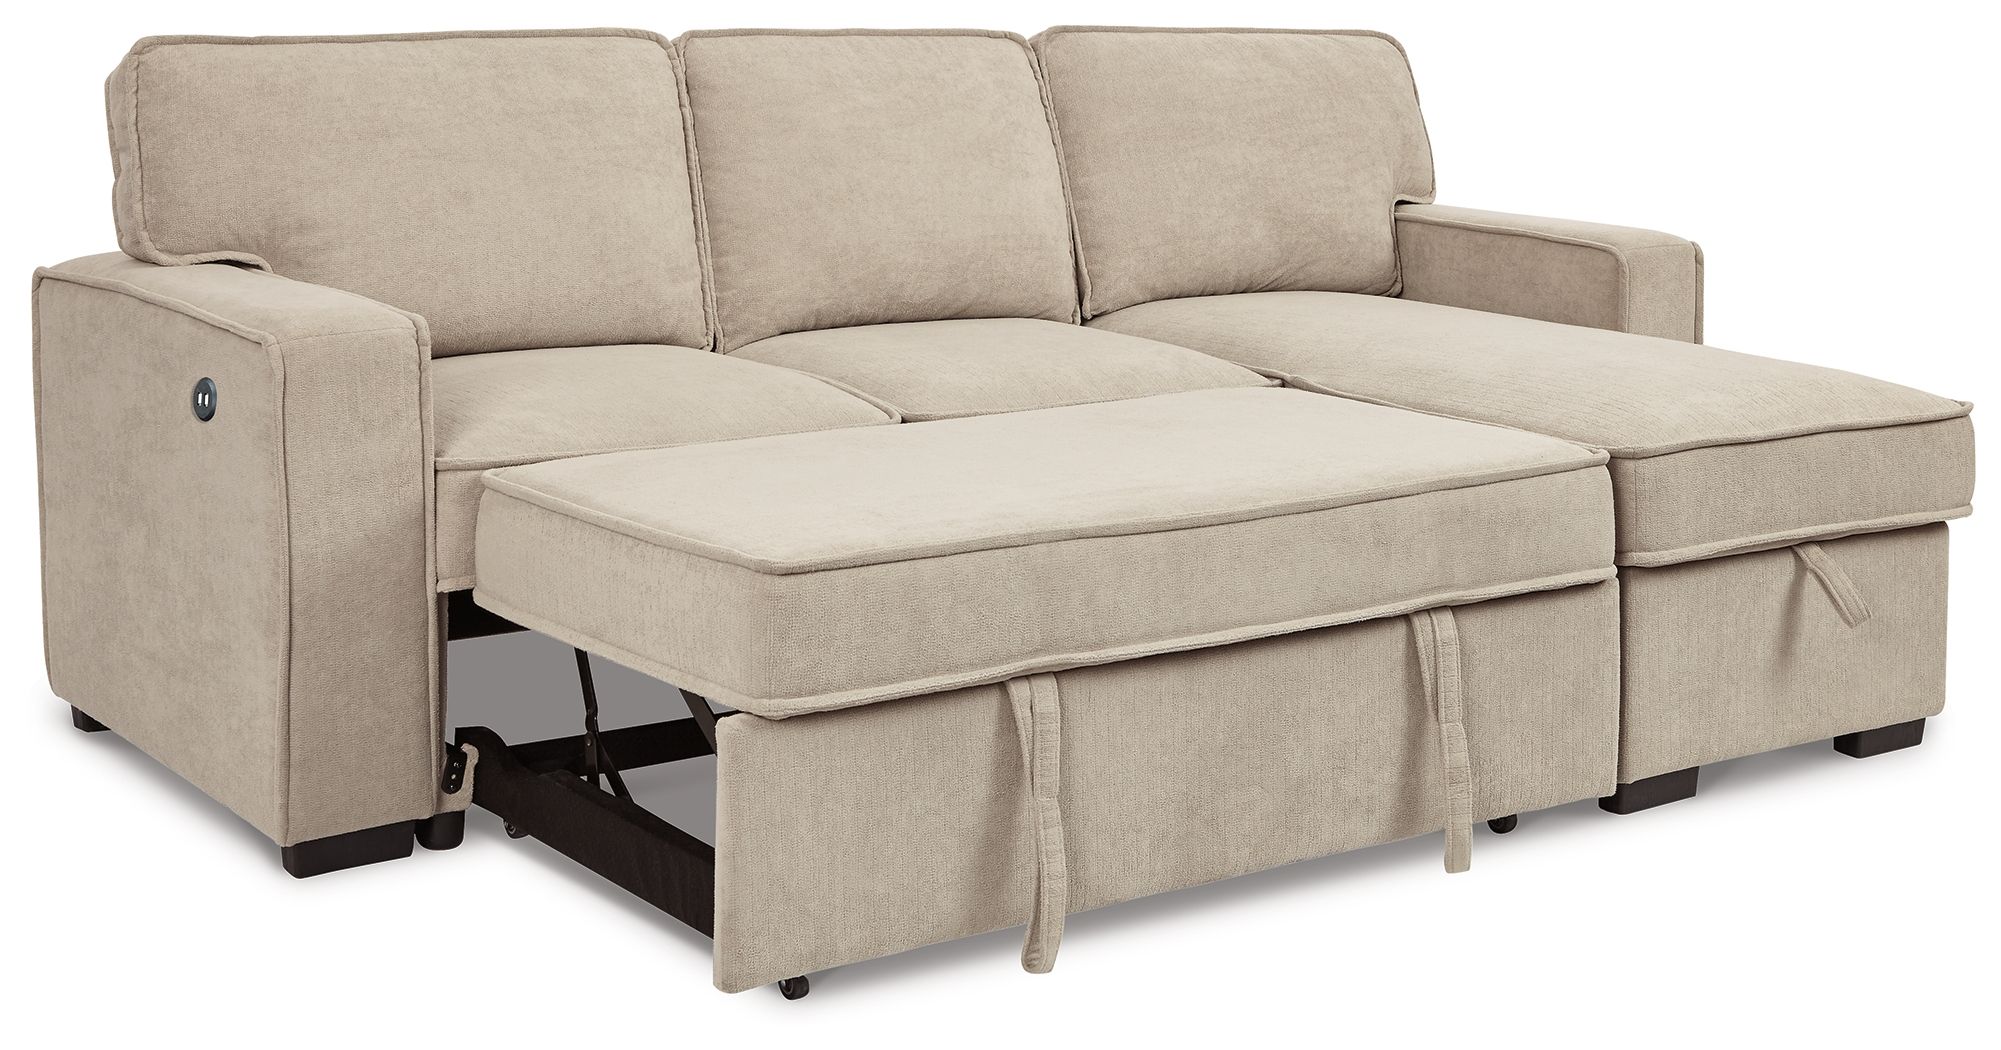 Famous Darton 2 Piece Sleeper Sectional With Storage 73506s1signature With Left Or Right Facing Sleeper Sectionals (View 5 of 15)